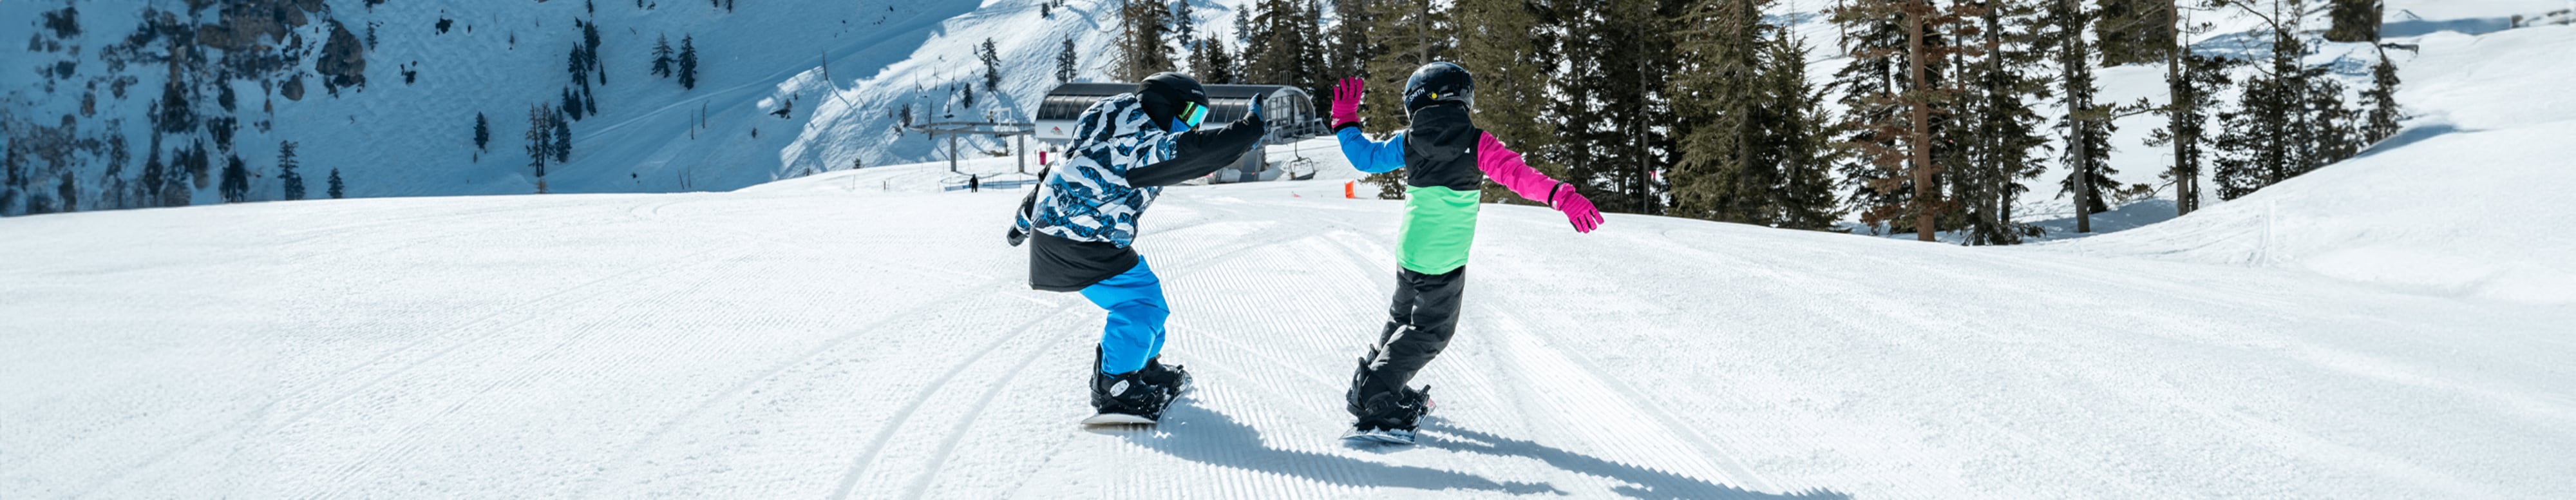 Two kids high-five while snowboarding down the slopes of a mountain resort. 